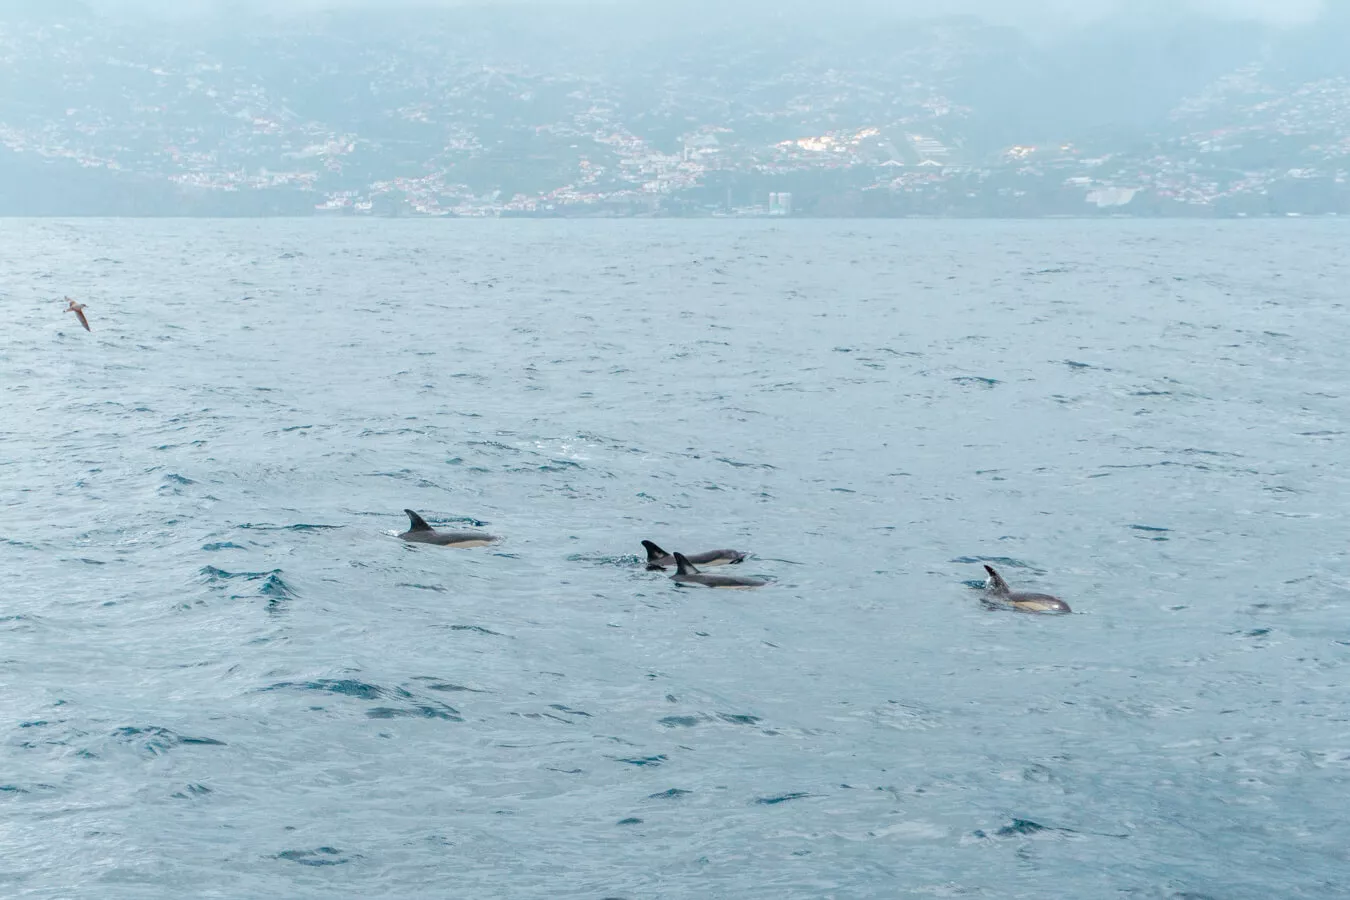 Dolphins swimming off the coast of Funchal in Madeira.